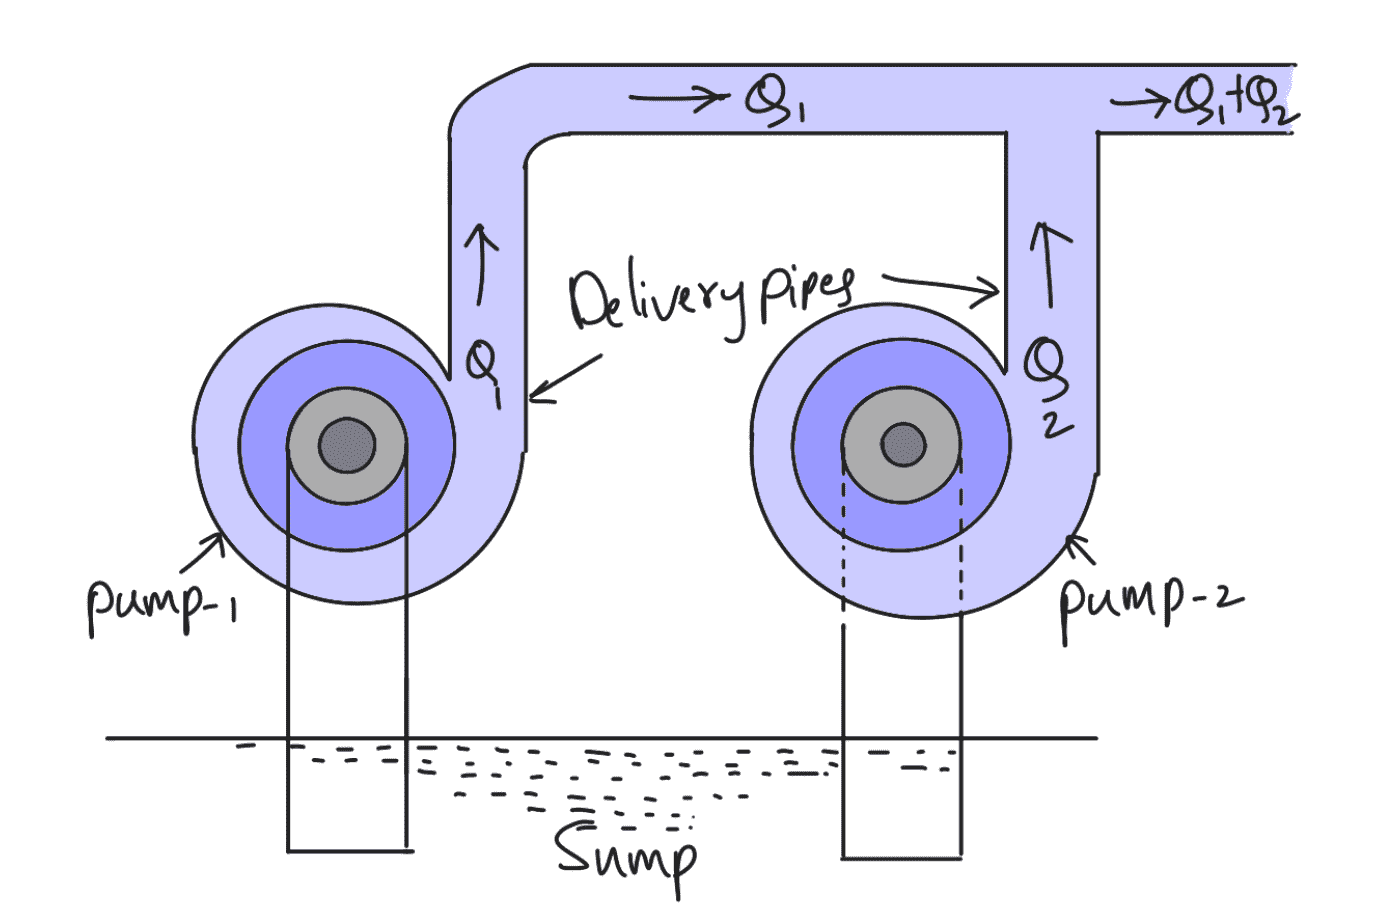 Multistage Pumps for High Discharge (Impellers in Parallel)